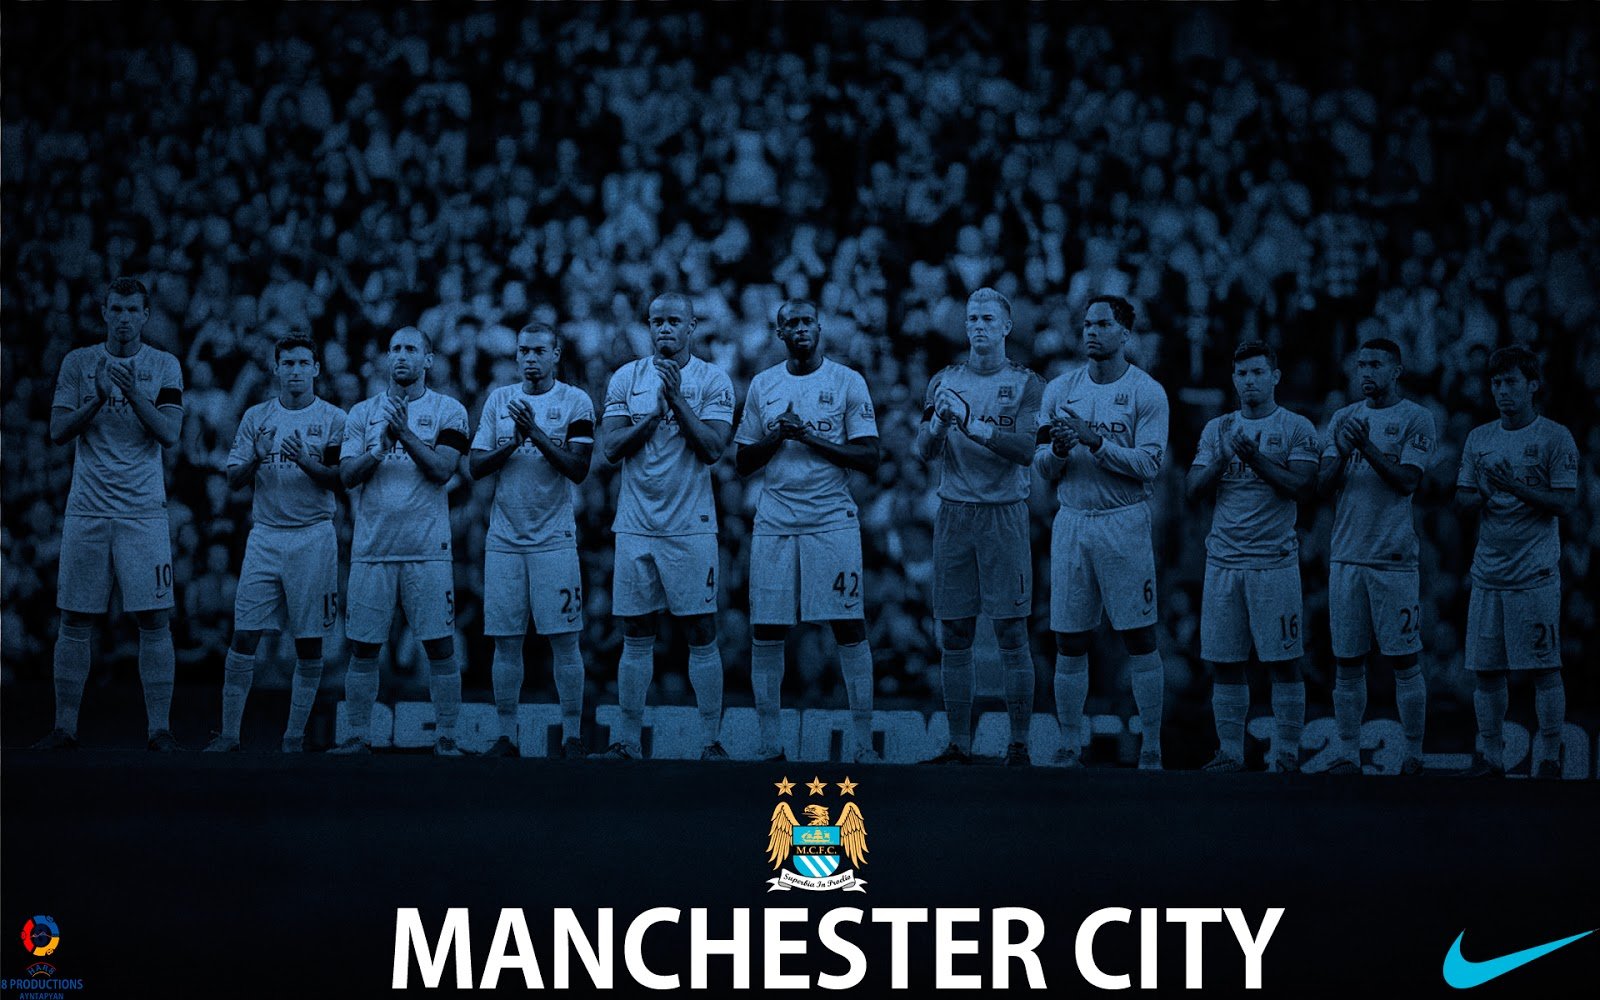 Productions Manchester City 201314 wallpaper